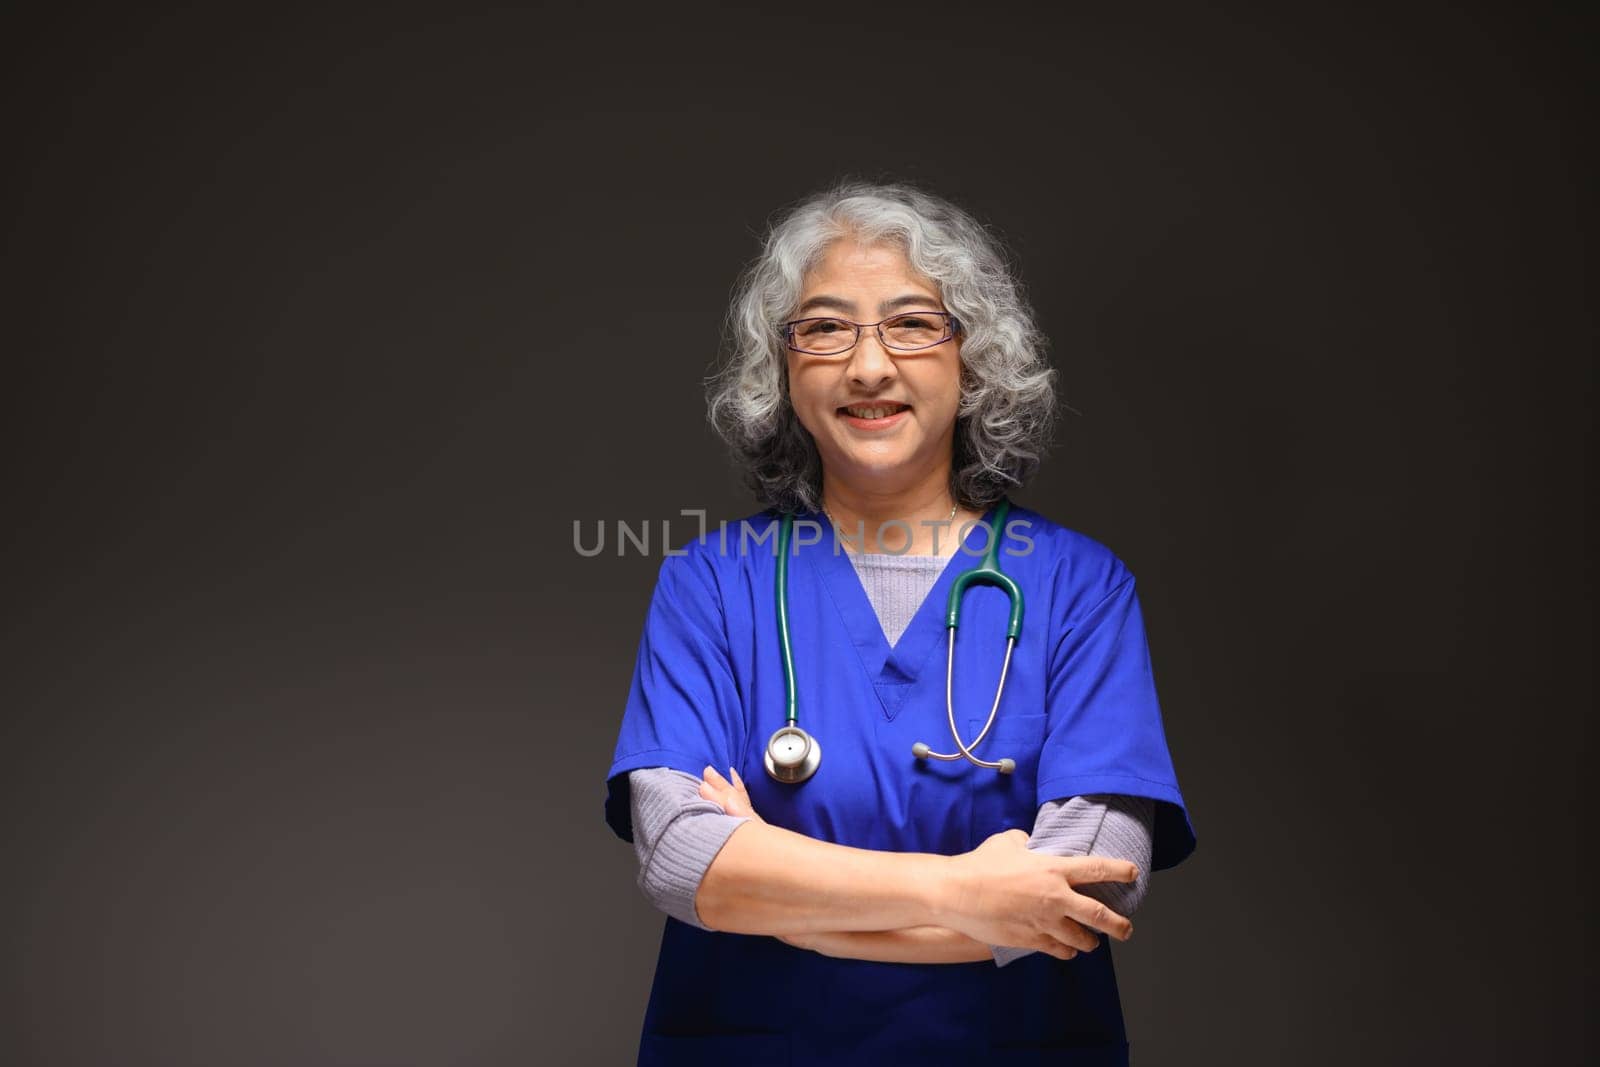 Portrait of friendly mature female doctor with stethoscope around her neck standing on black background.